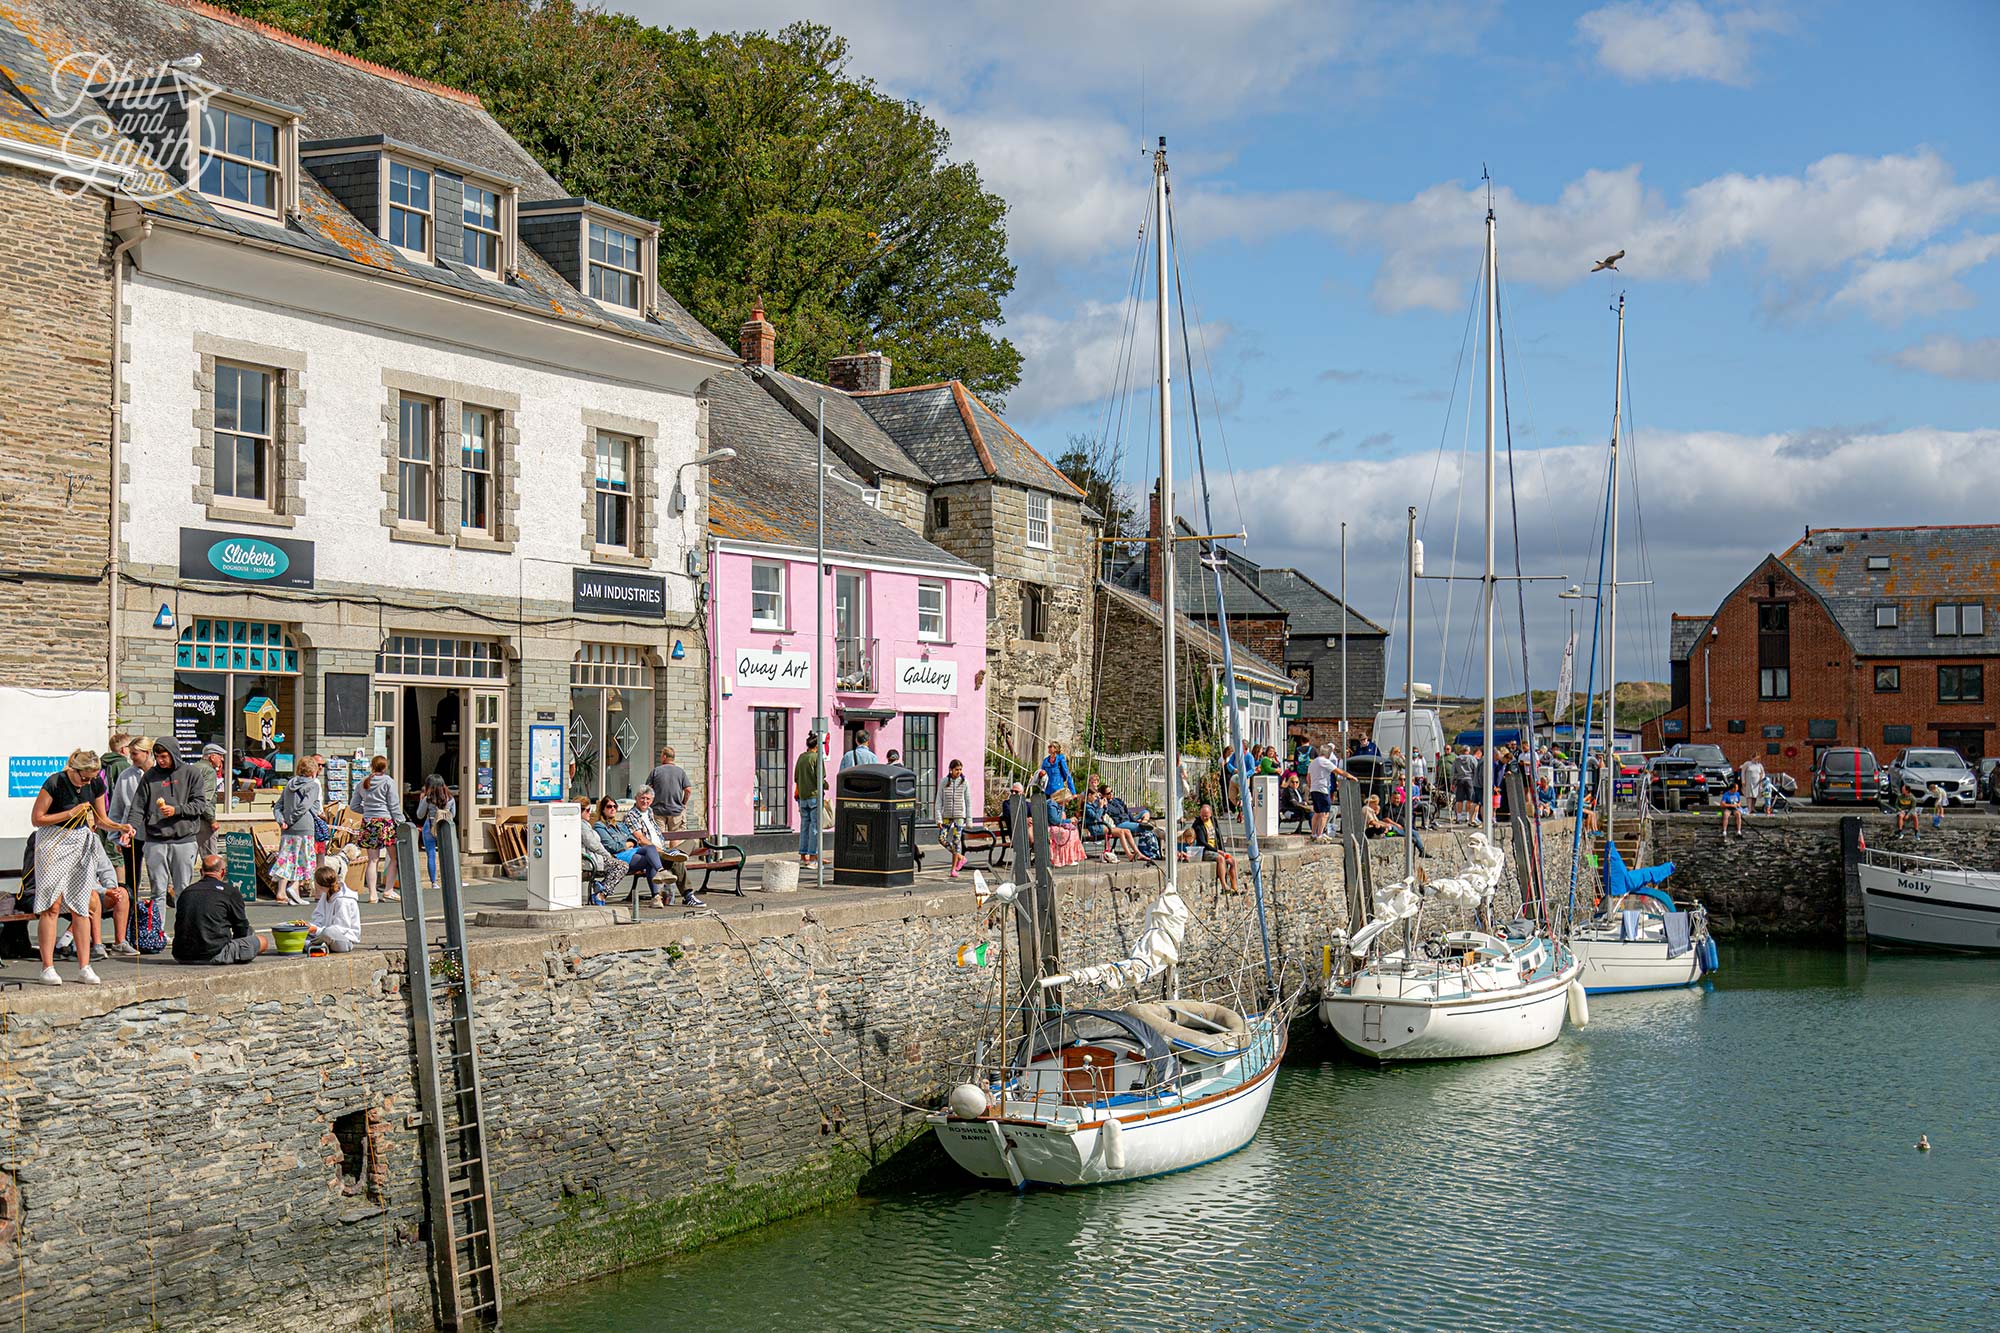 Padstow's small harbour town is a delight to wander around